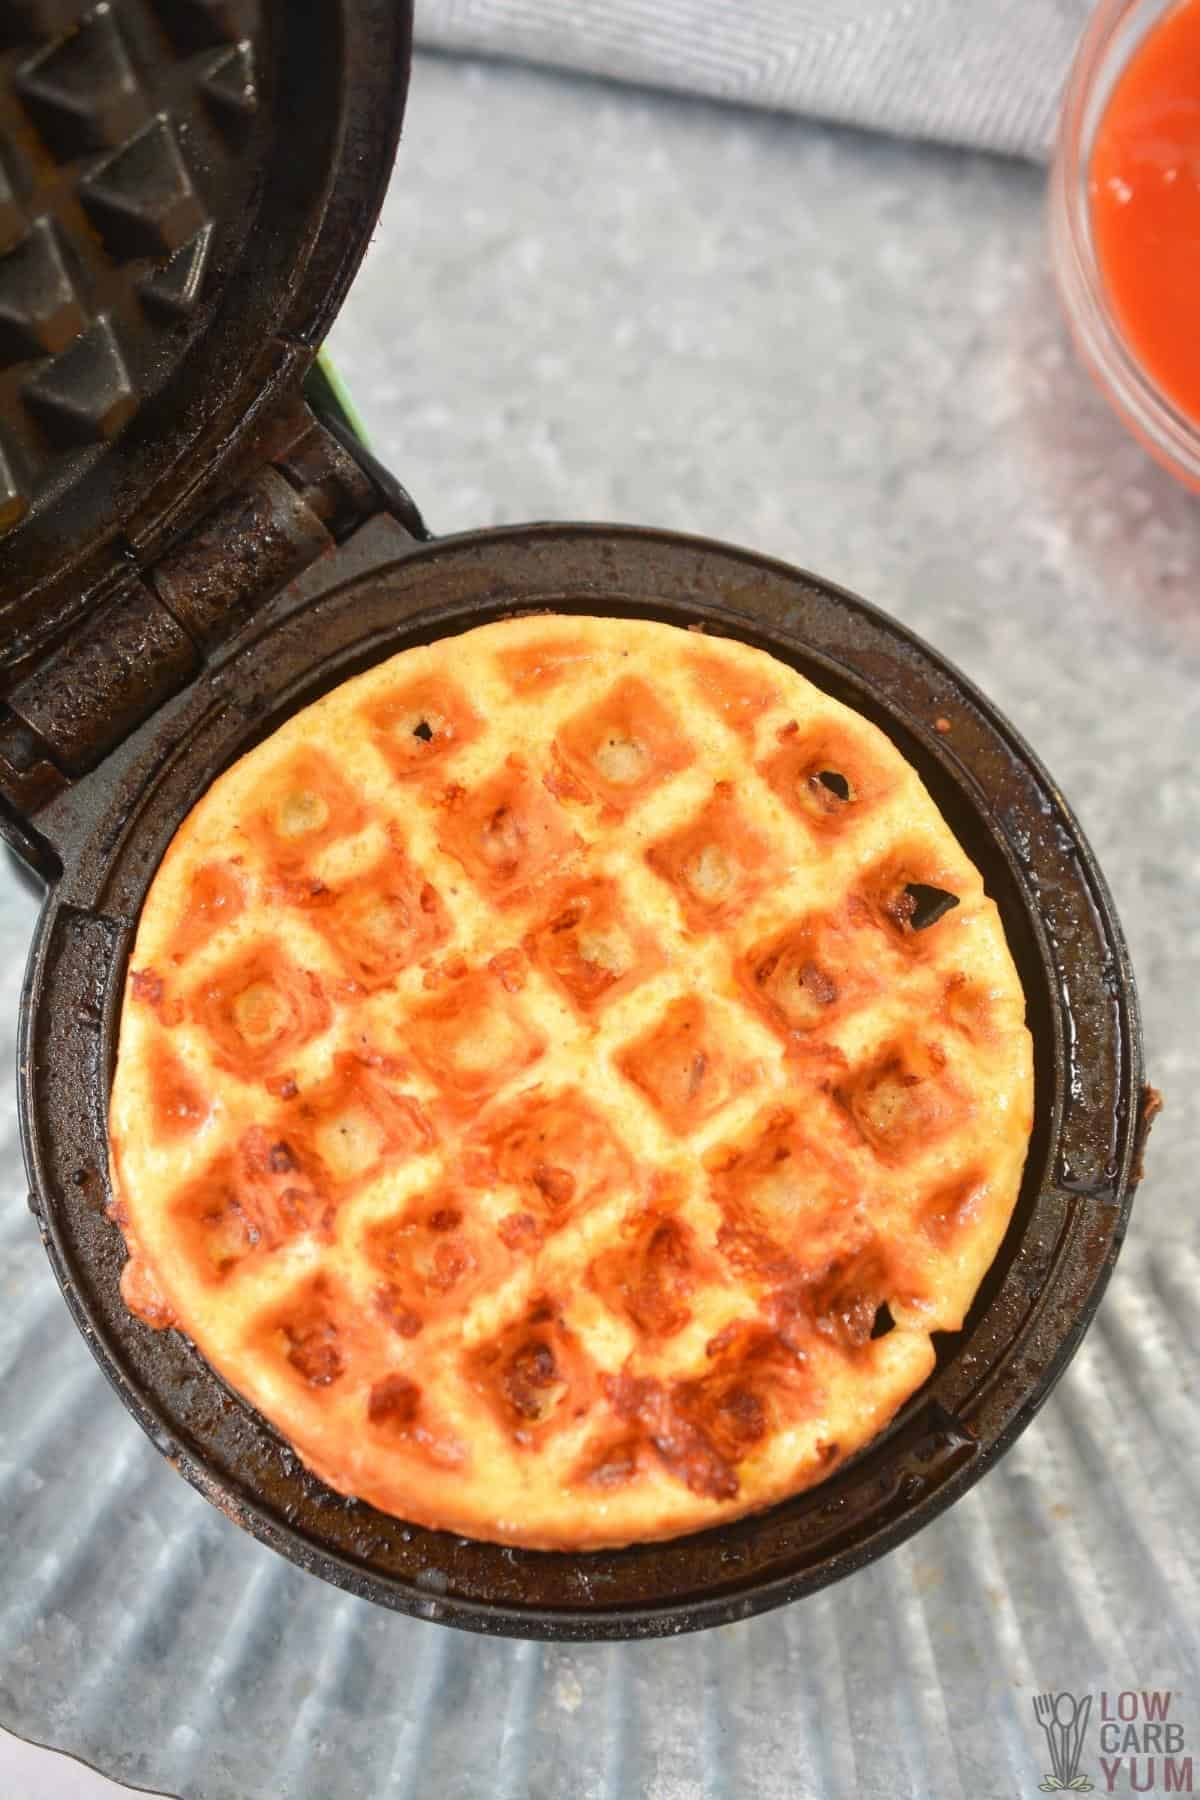 cheese and egg mixture cooking in mini waffle maker